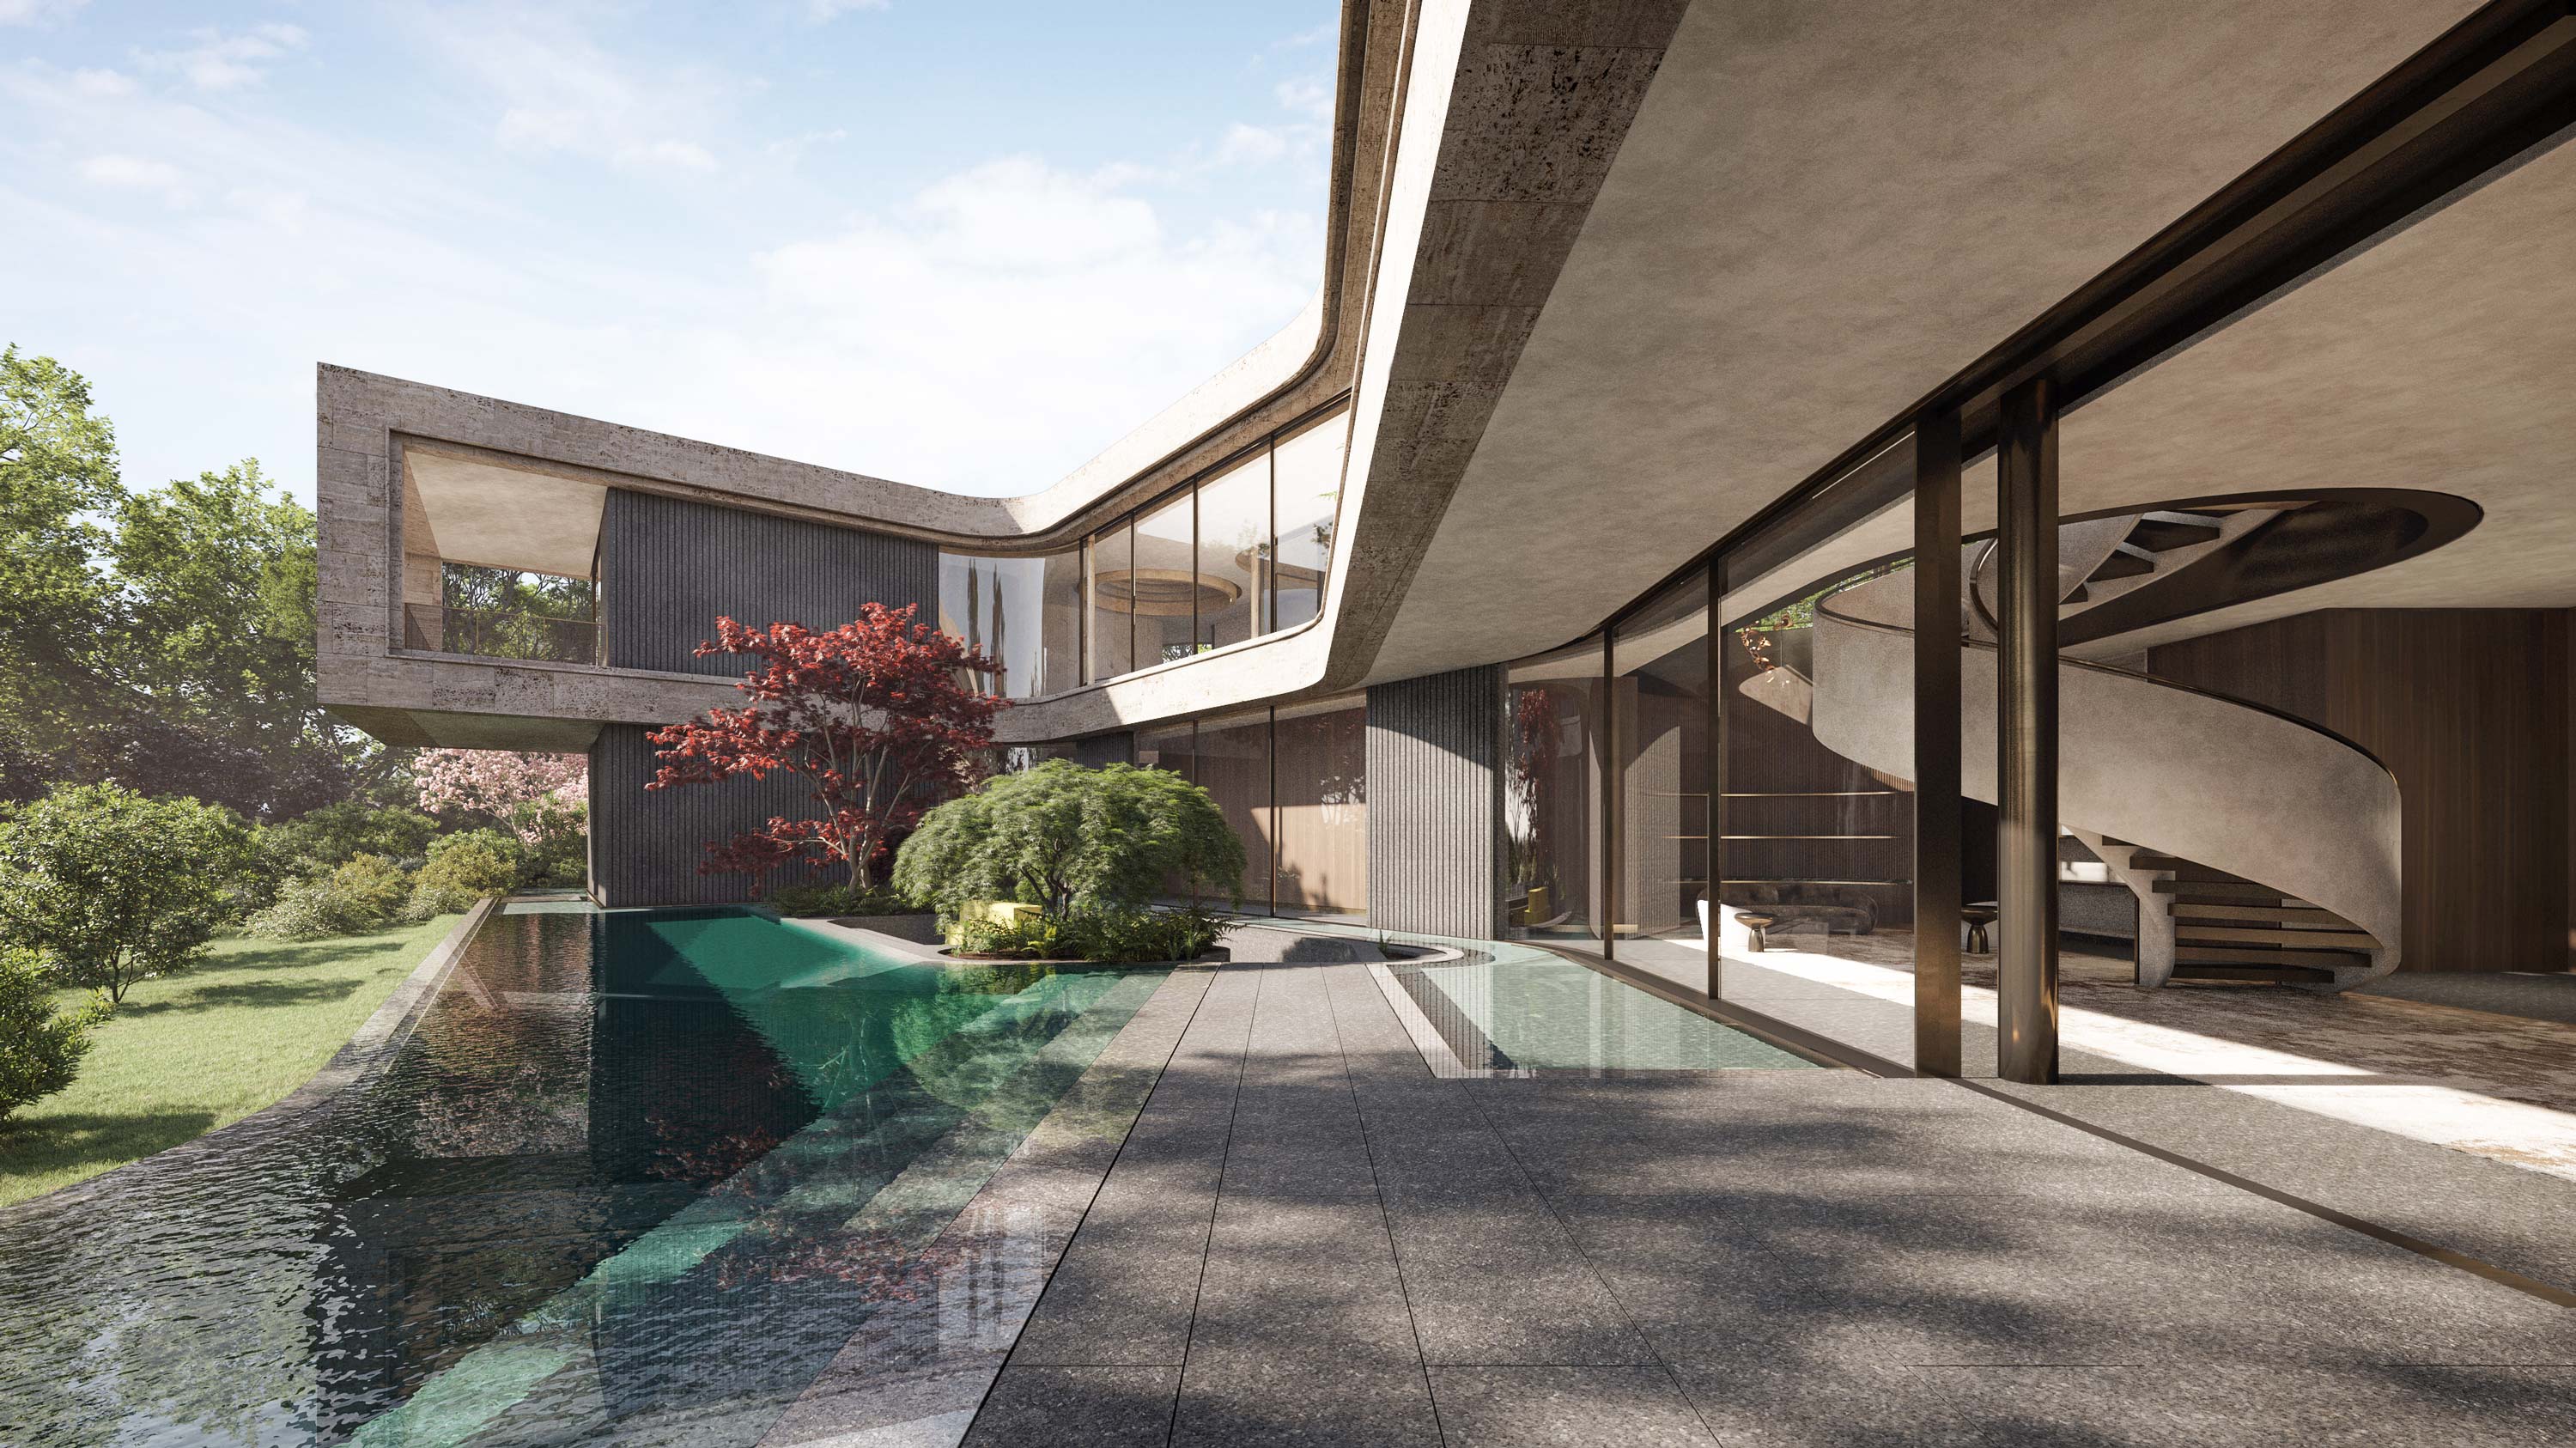 Exterior rendering of Ammamma Legacy Residence by Specht Novak Architects featuring the pool and ribbon-like spiral staircase inside.